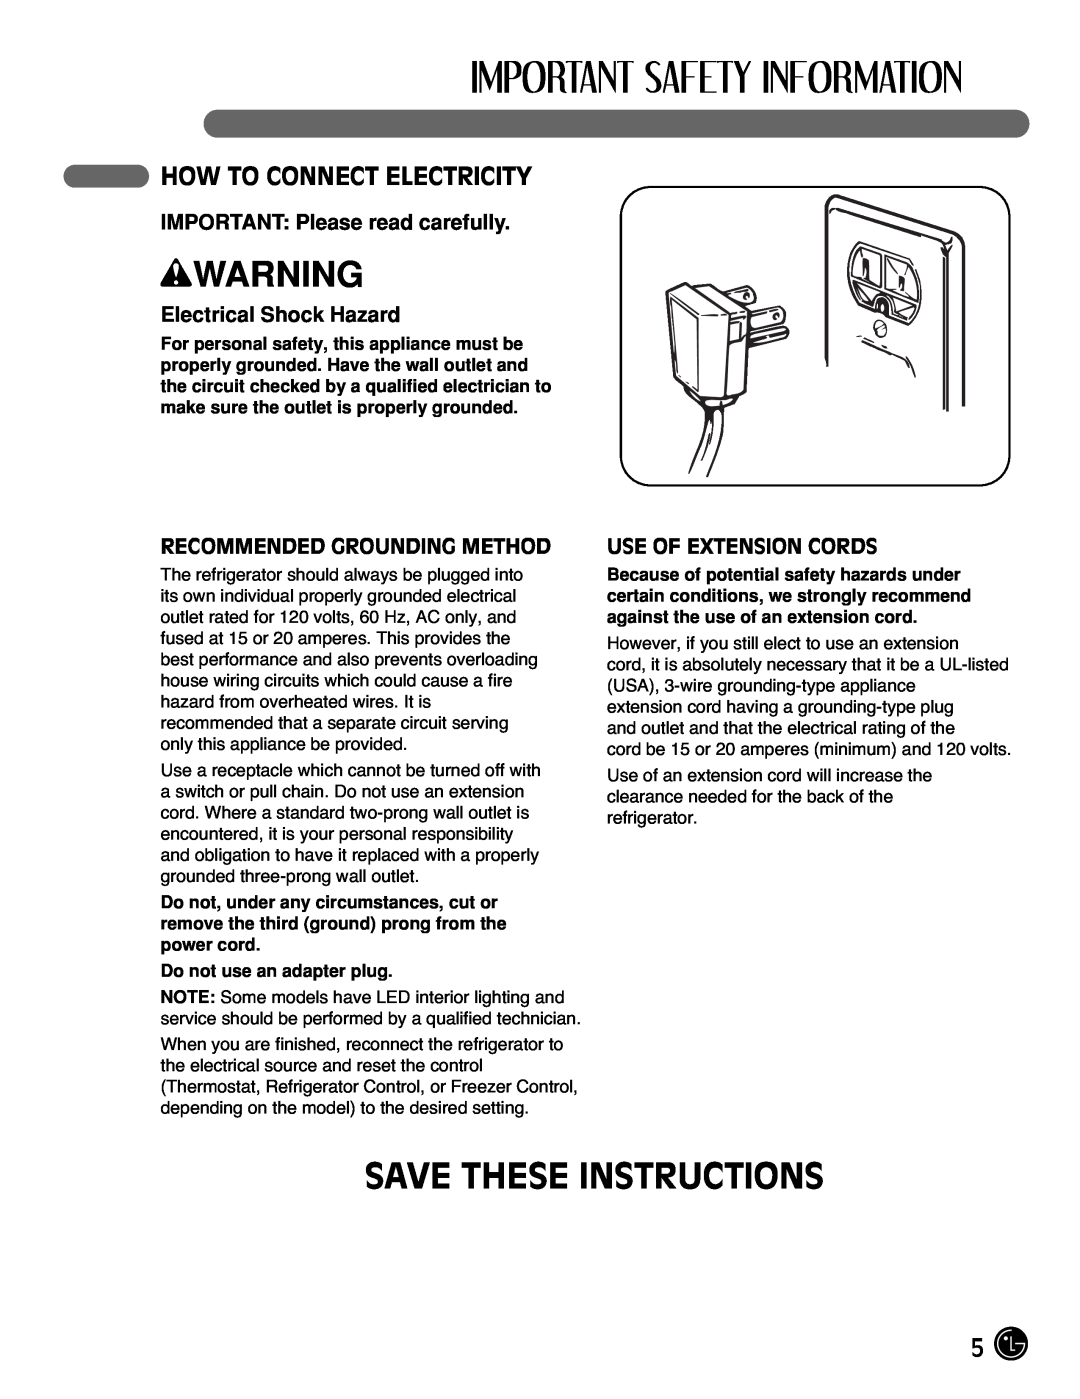 LG Electronics LFX25971** How To Connect Electricity, IMPORTANT Please read carefully, Electrical Shock Hazard, wWARNING 